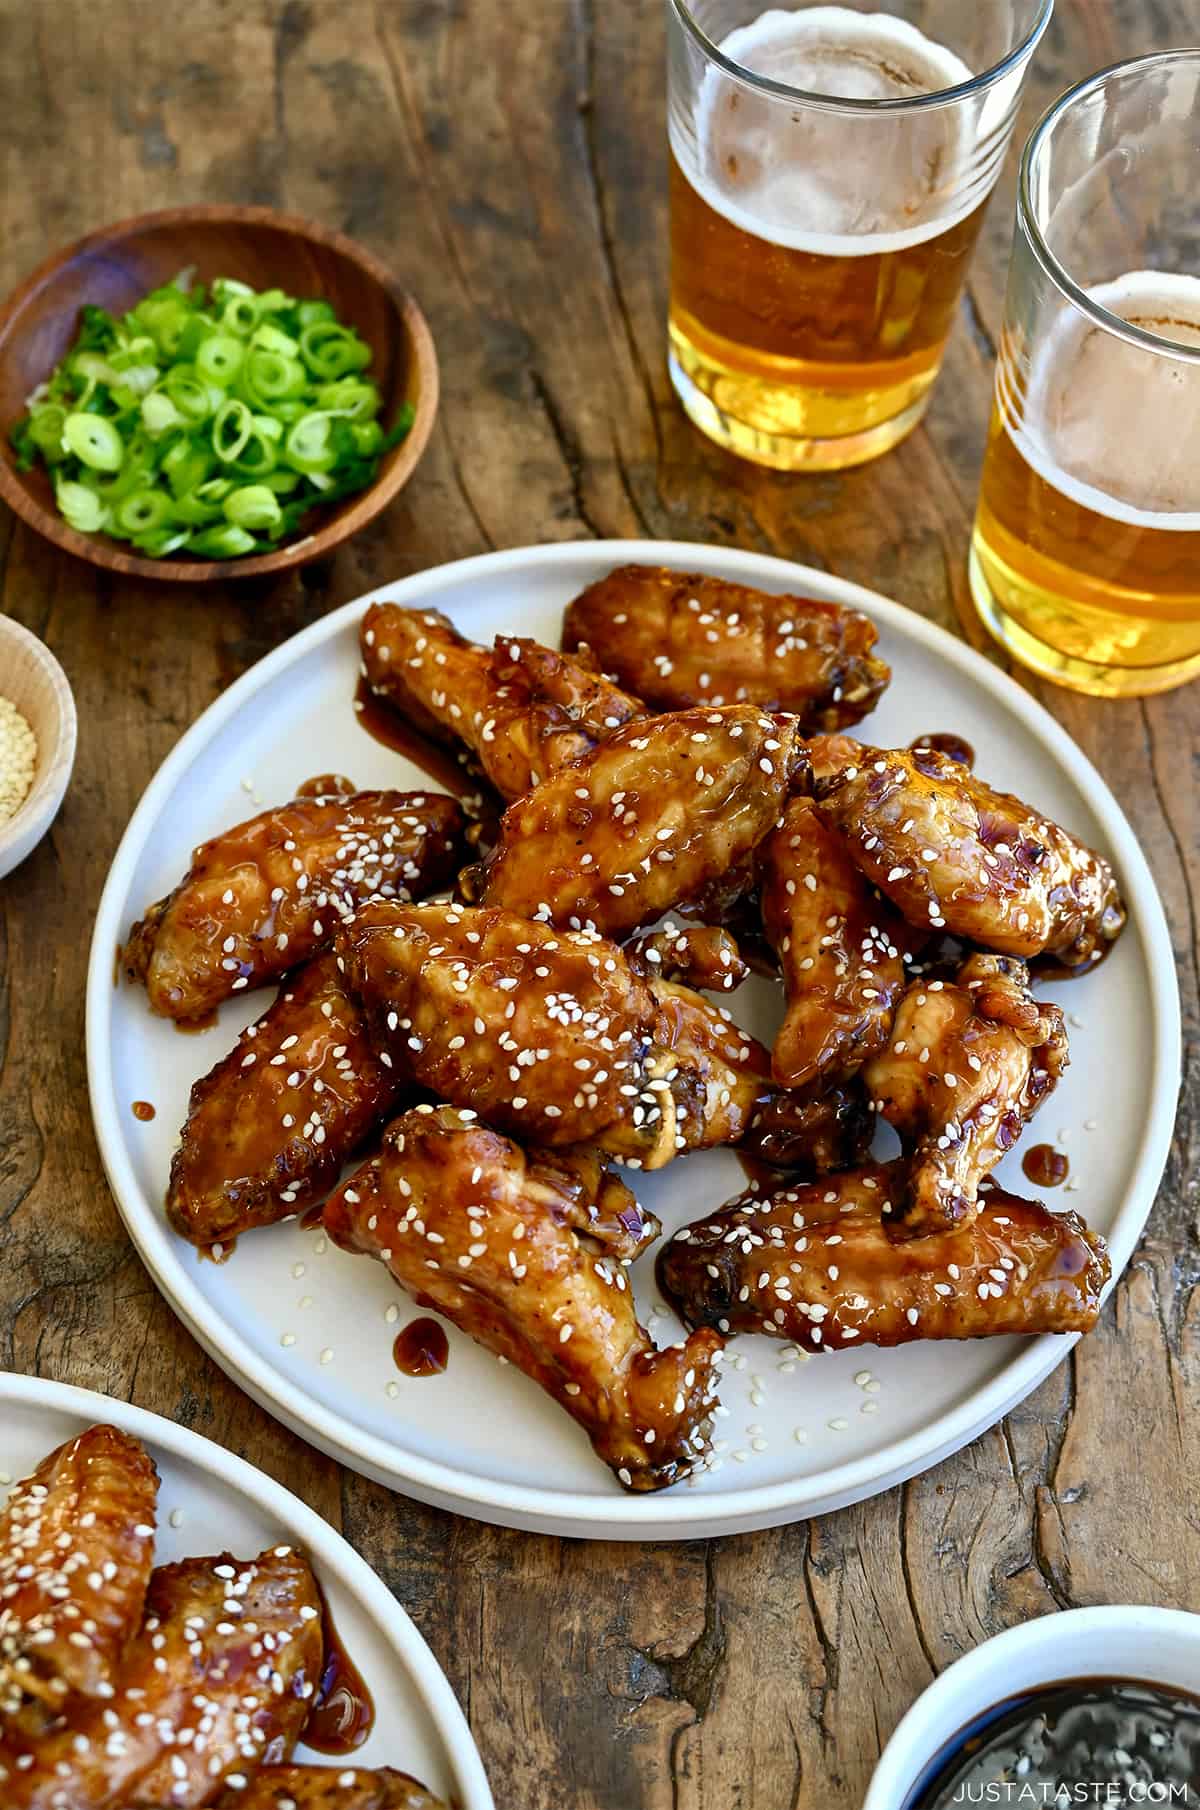 Baked chicken wings coated in teriyaki sauce and sprinkled with sesame seeds on a white plate next to two glasses containing beer and a small bowl with sliced scallions.